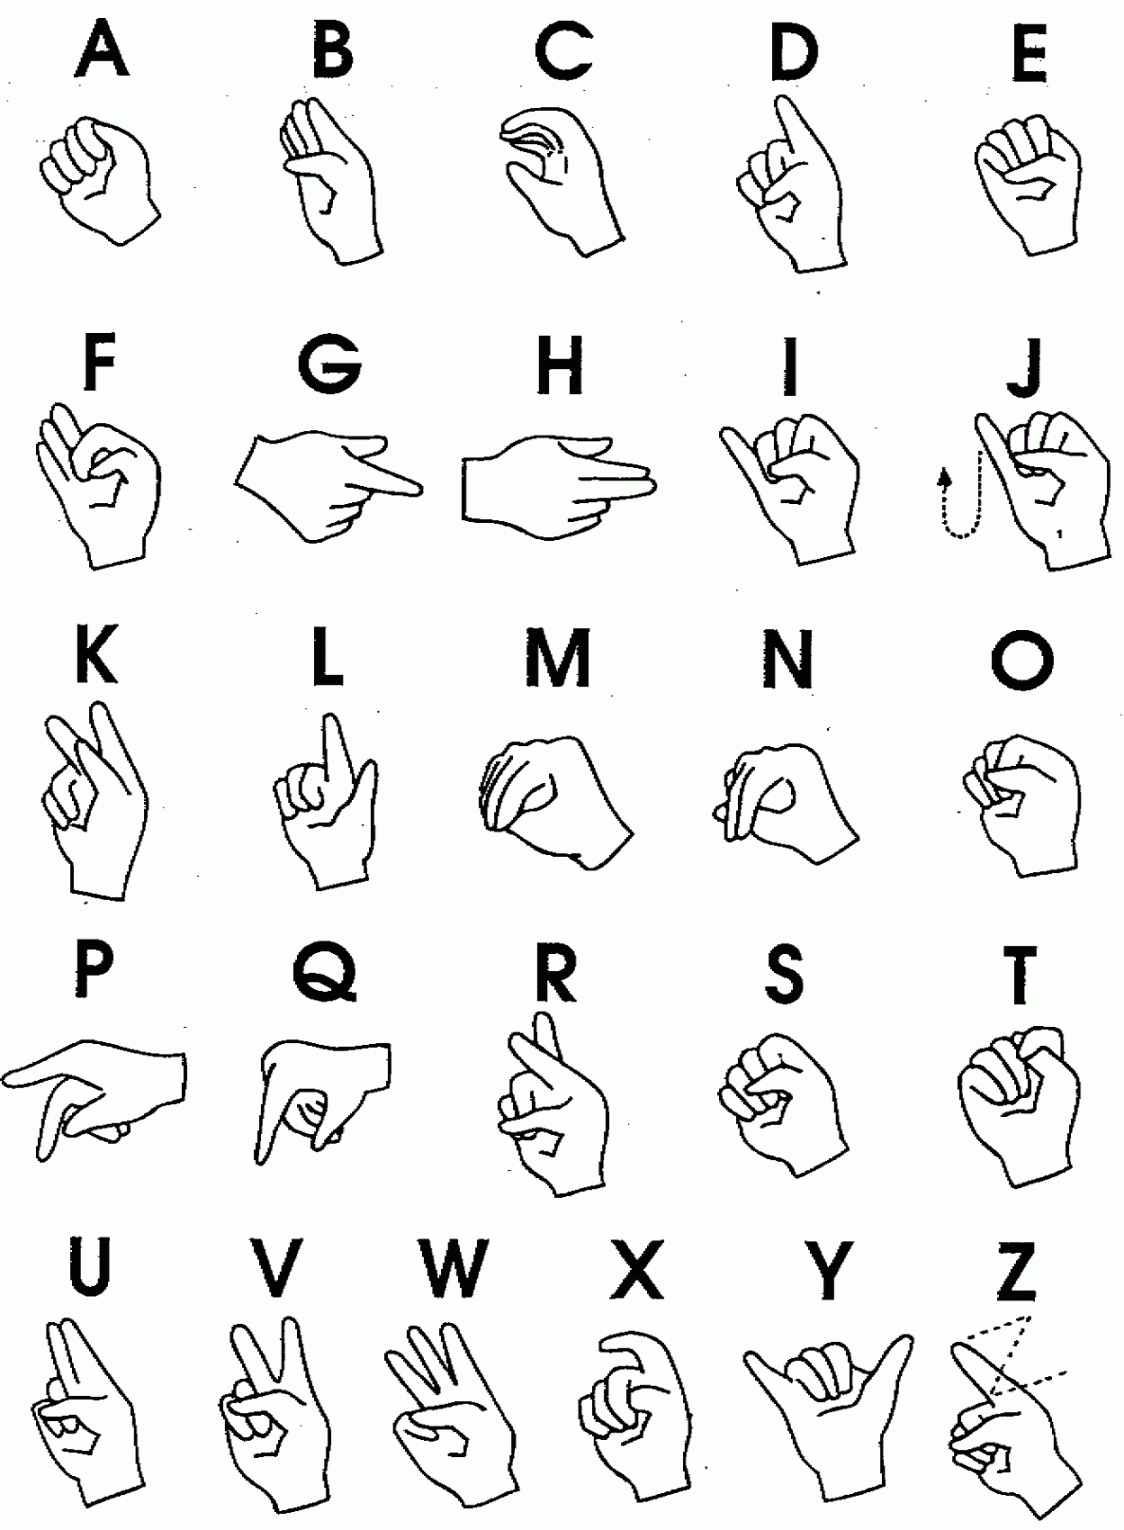 Sign Language Images for the Learner  Sign language alphabet